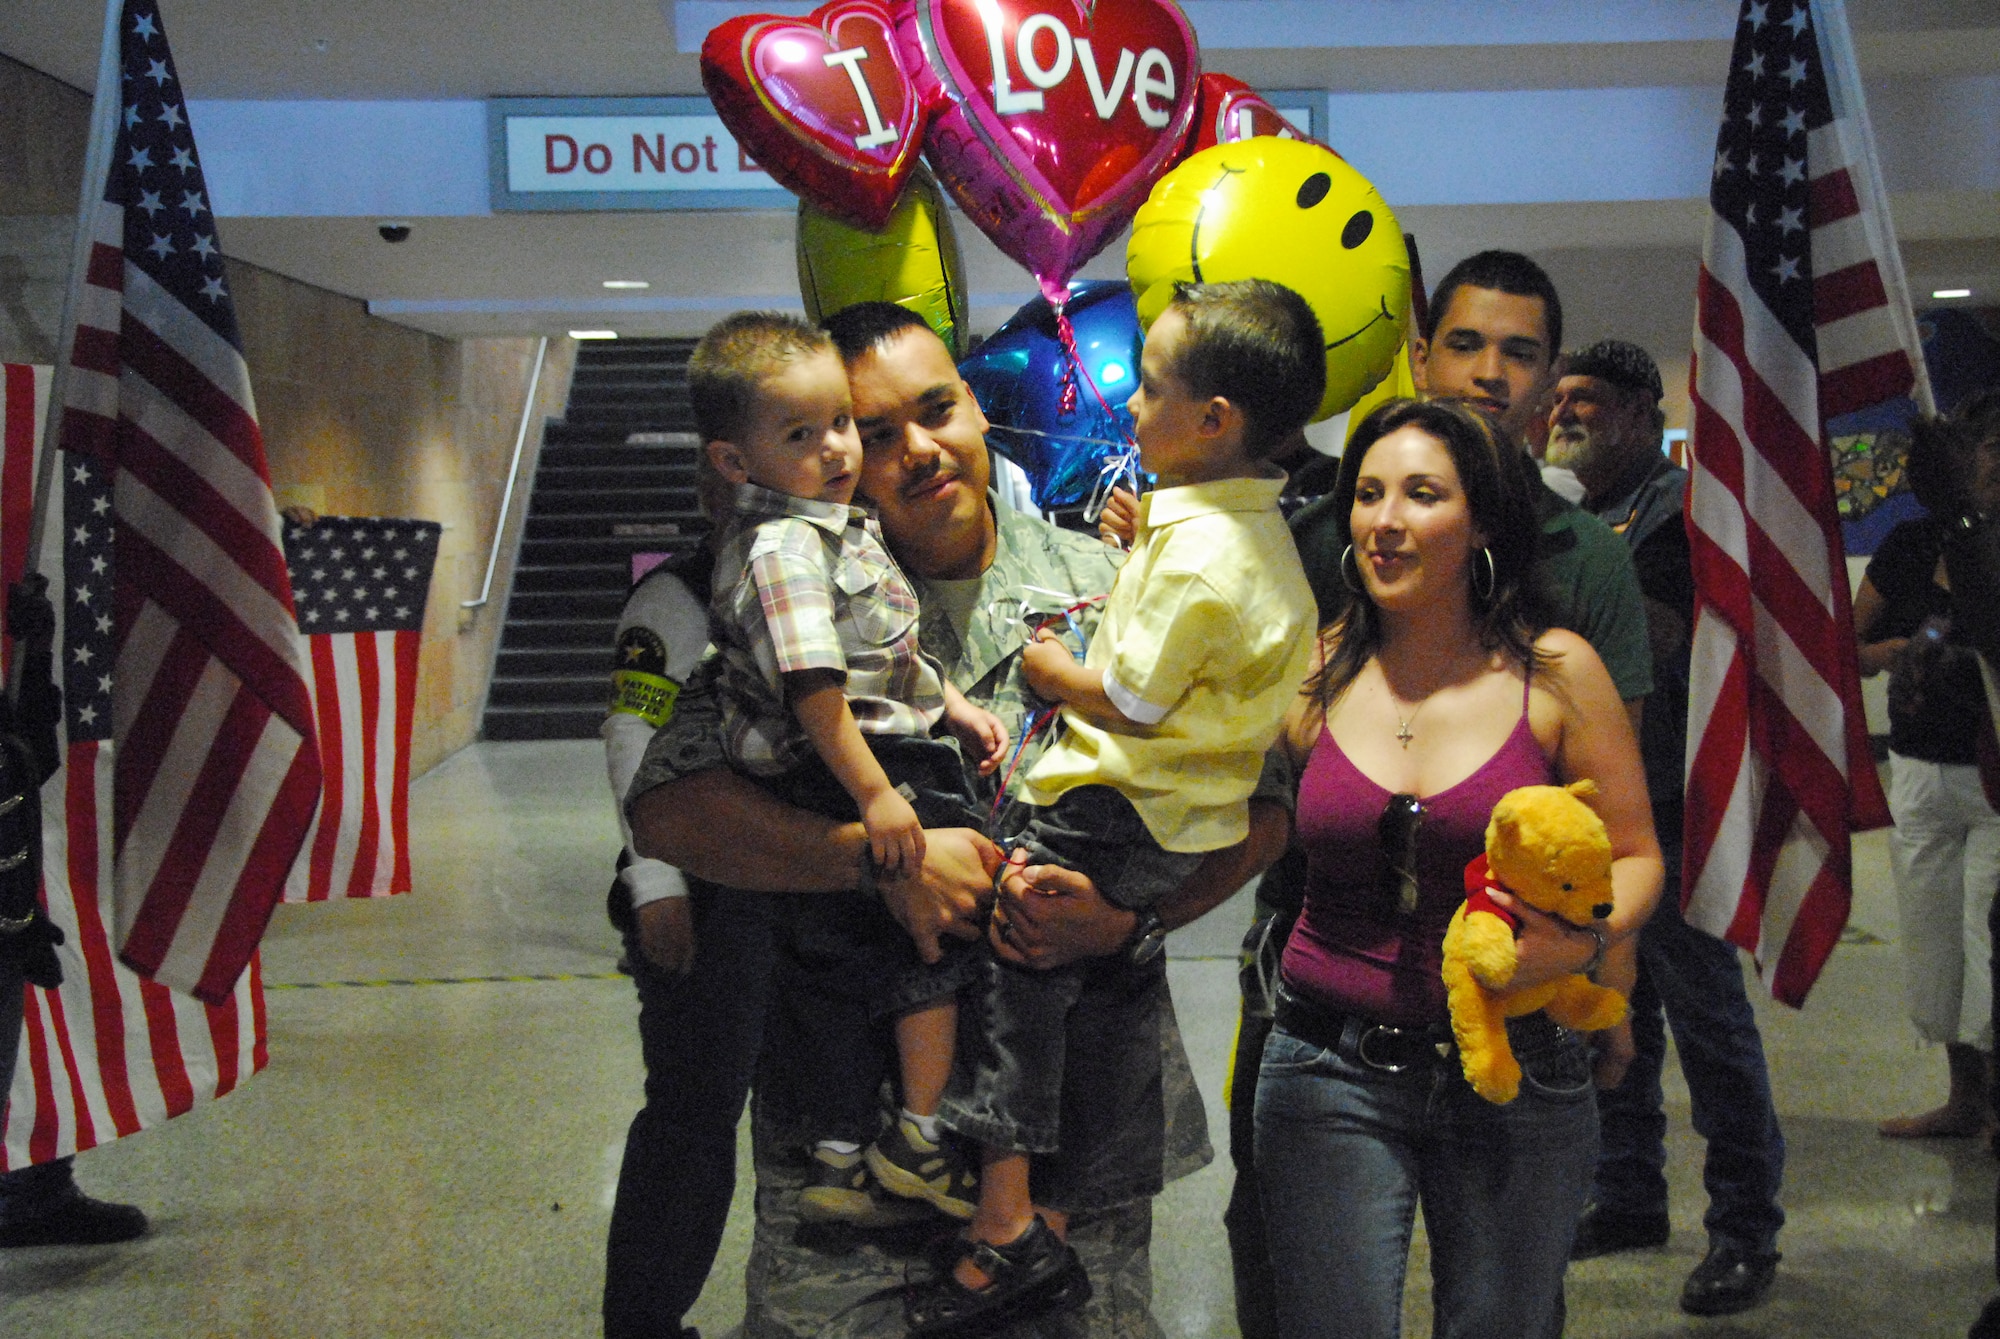 Tech. Sgt. Santos Flores,162nd Force Support Squadron, is greeted by family in the Tucson Airport baggage claim after a four-month deployment to Southwest Asia, Oct. 22.  (Air National Guard photo by Master Sgt. David Neve)